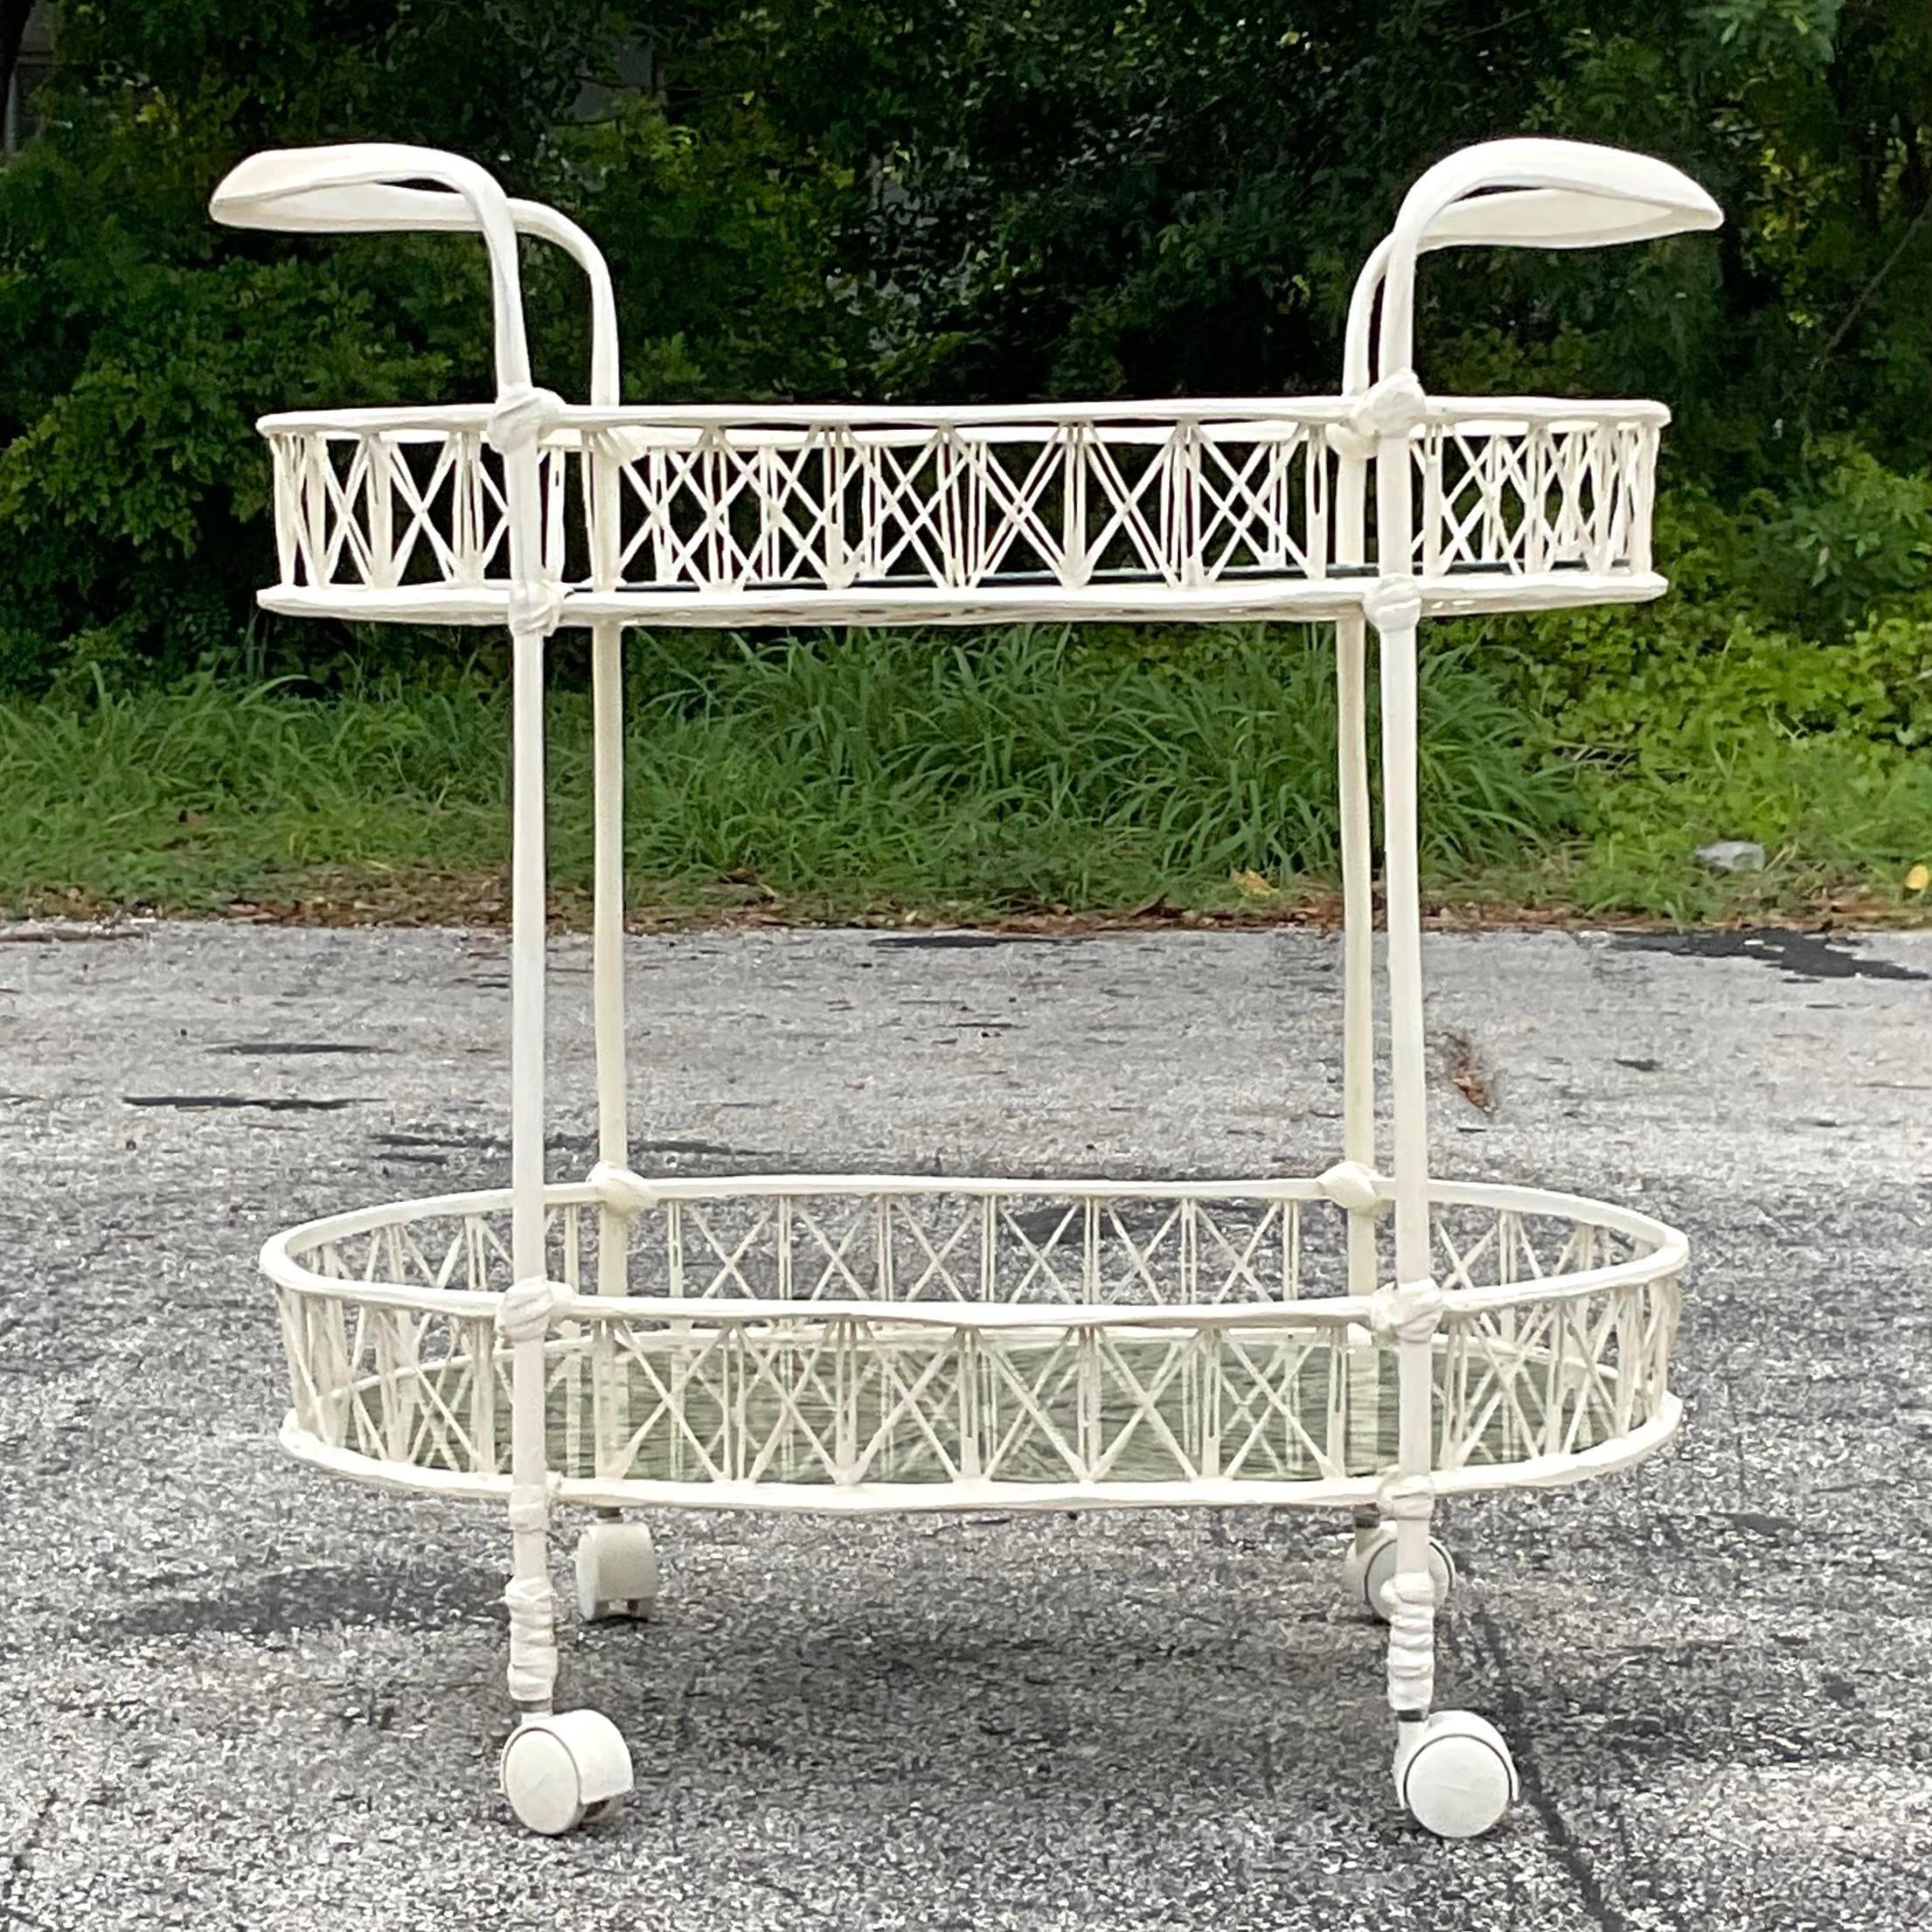 A fabulous vintage MCM outdoor bar cart. Made from spun fiberglass with inset glass shelves. A terrific material for outdoors, but chic enough to bring indoors as well. Made by the iconic Russell Woodard. Acquired from a Palm Beach estate.